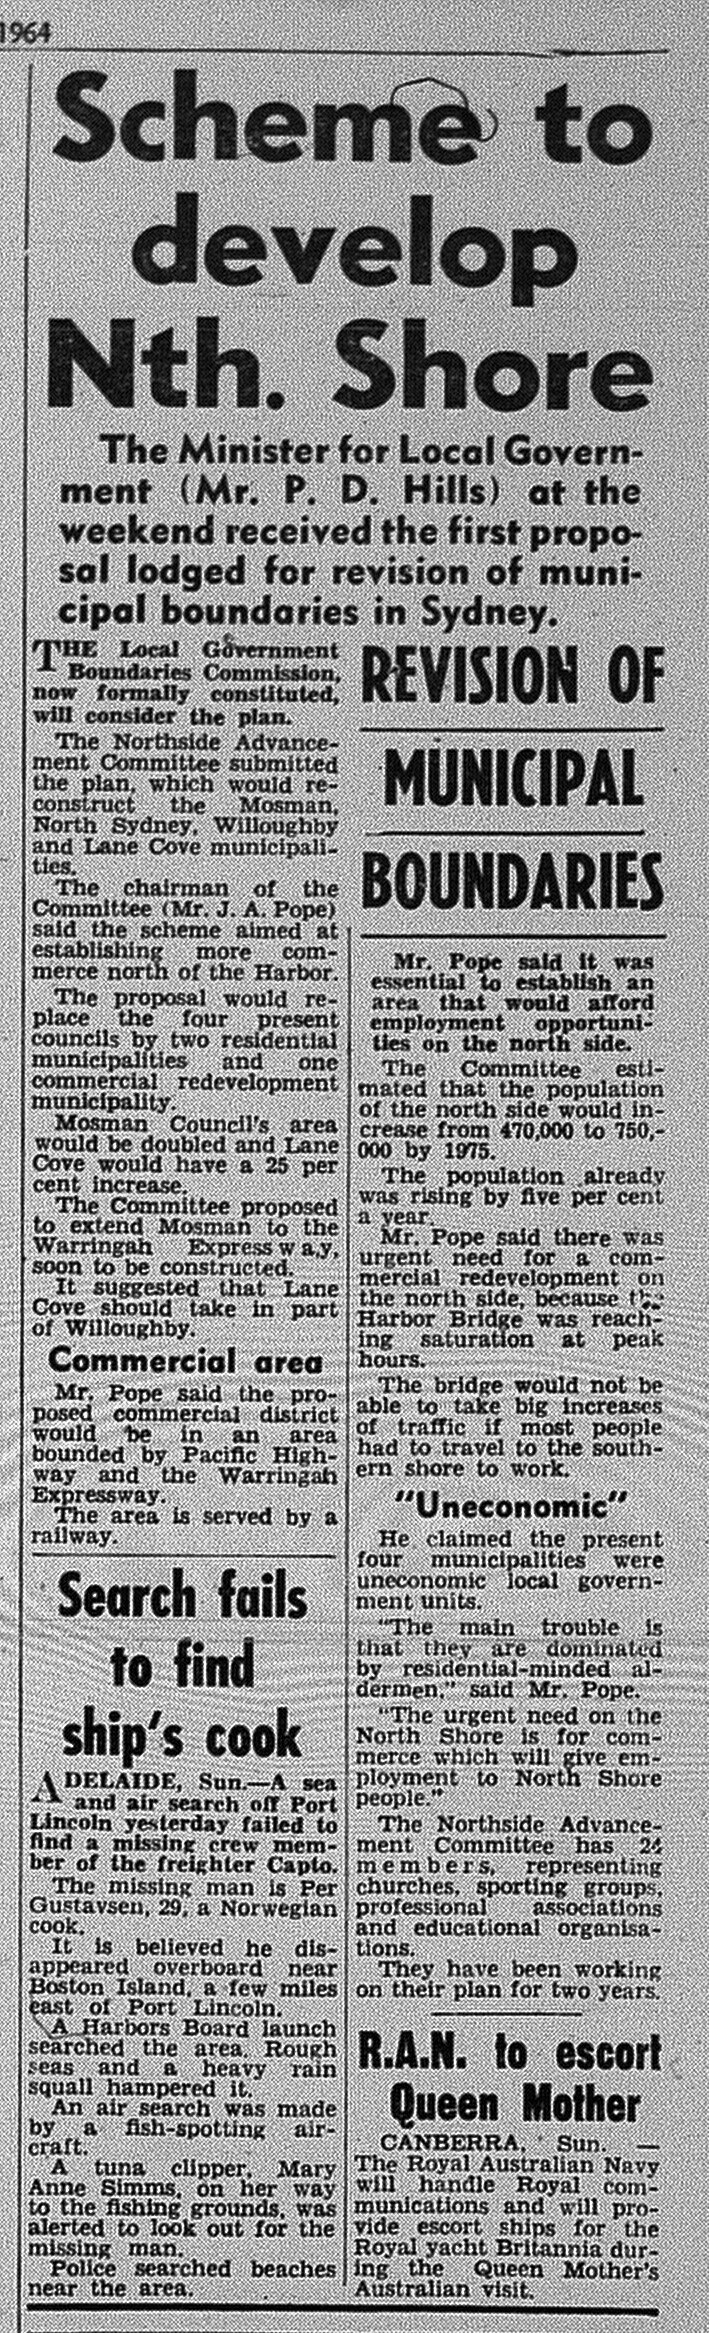 North Shore Council Boundary Changes proposed February 3 1964 daily telegraph 8